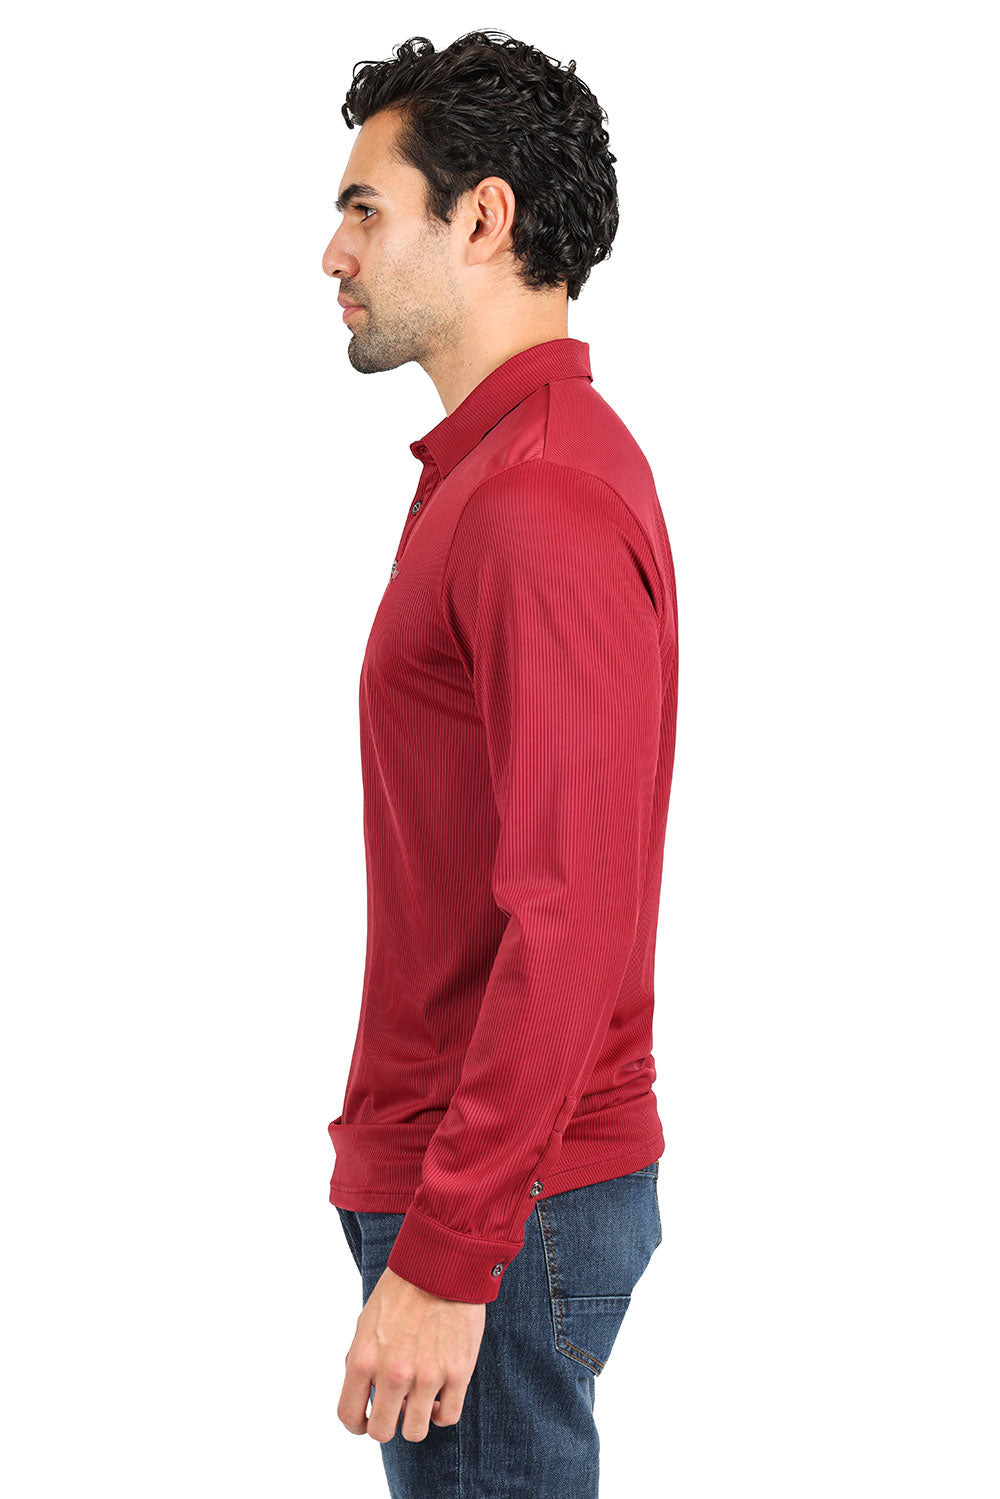 Barabas Men's Premium Solid Color Long Sleeve Polo Shirts 2DPL30 Red